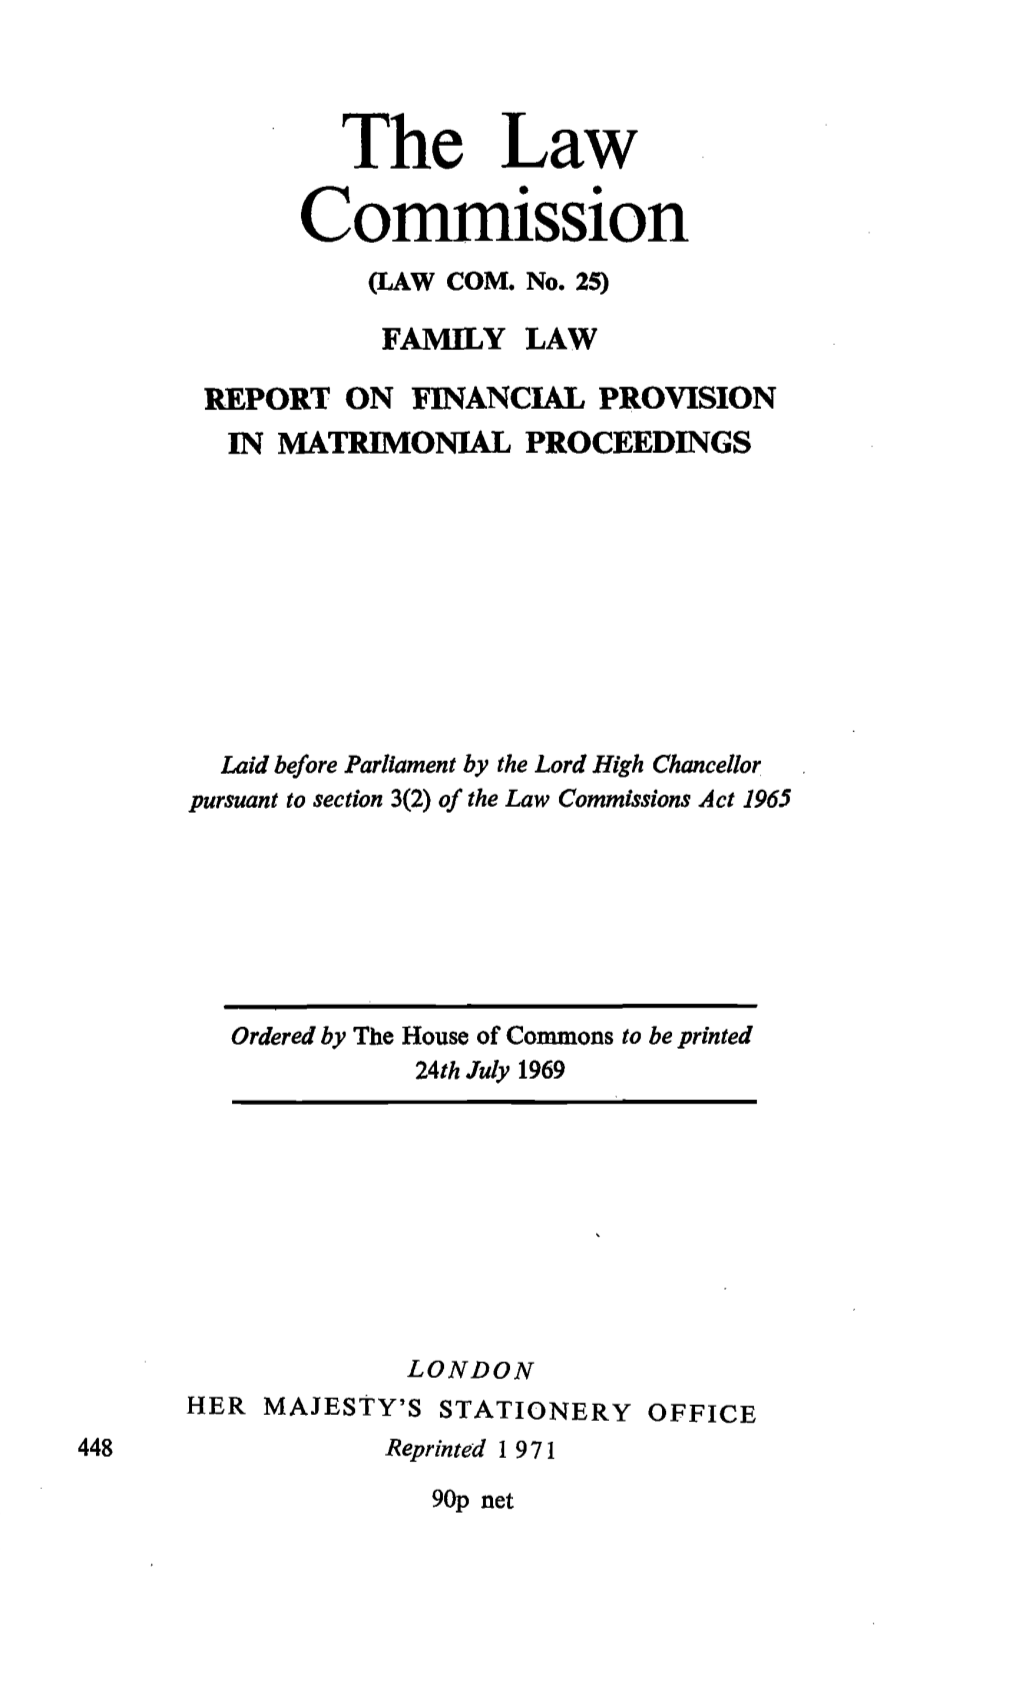 Family Law: Financial Provision in Matrimonial Proceedings Report